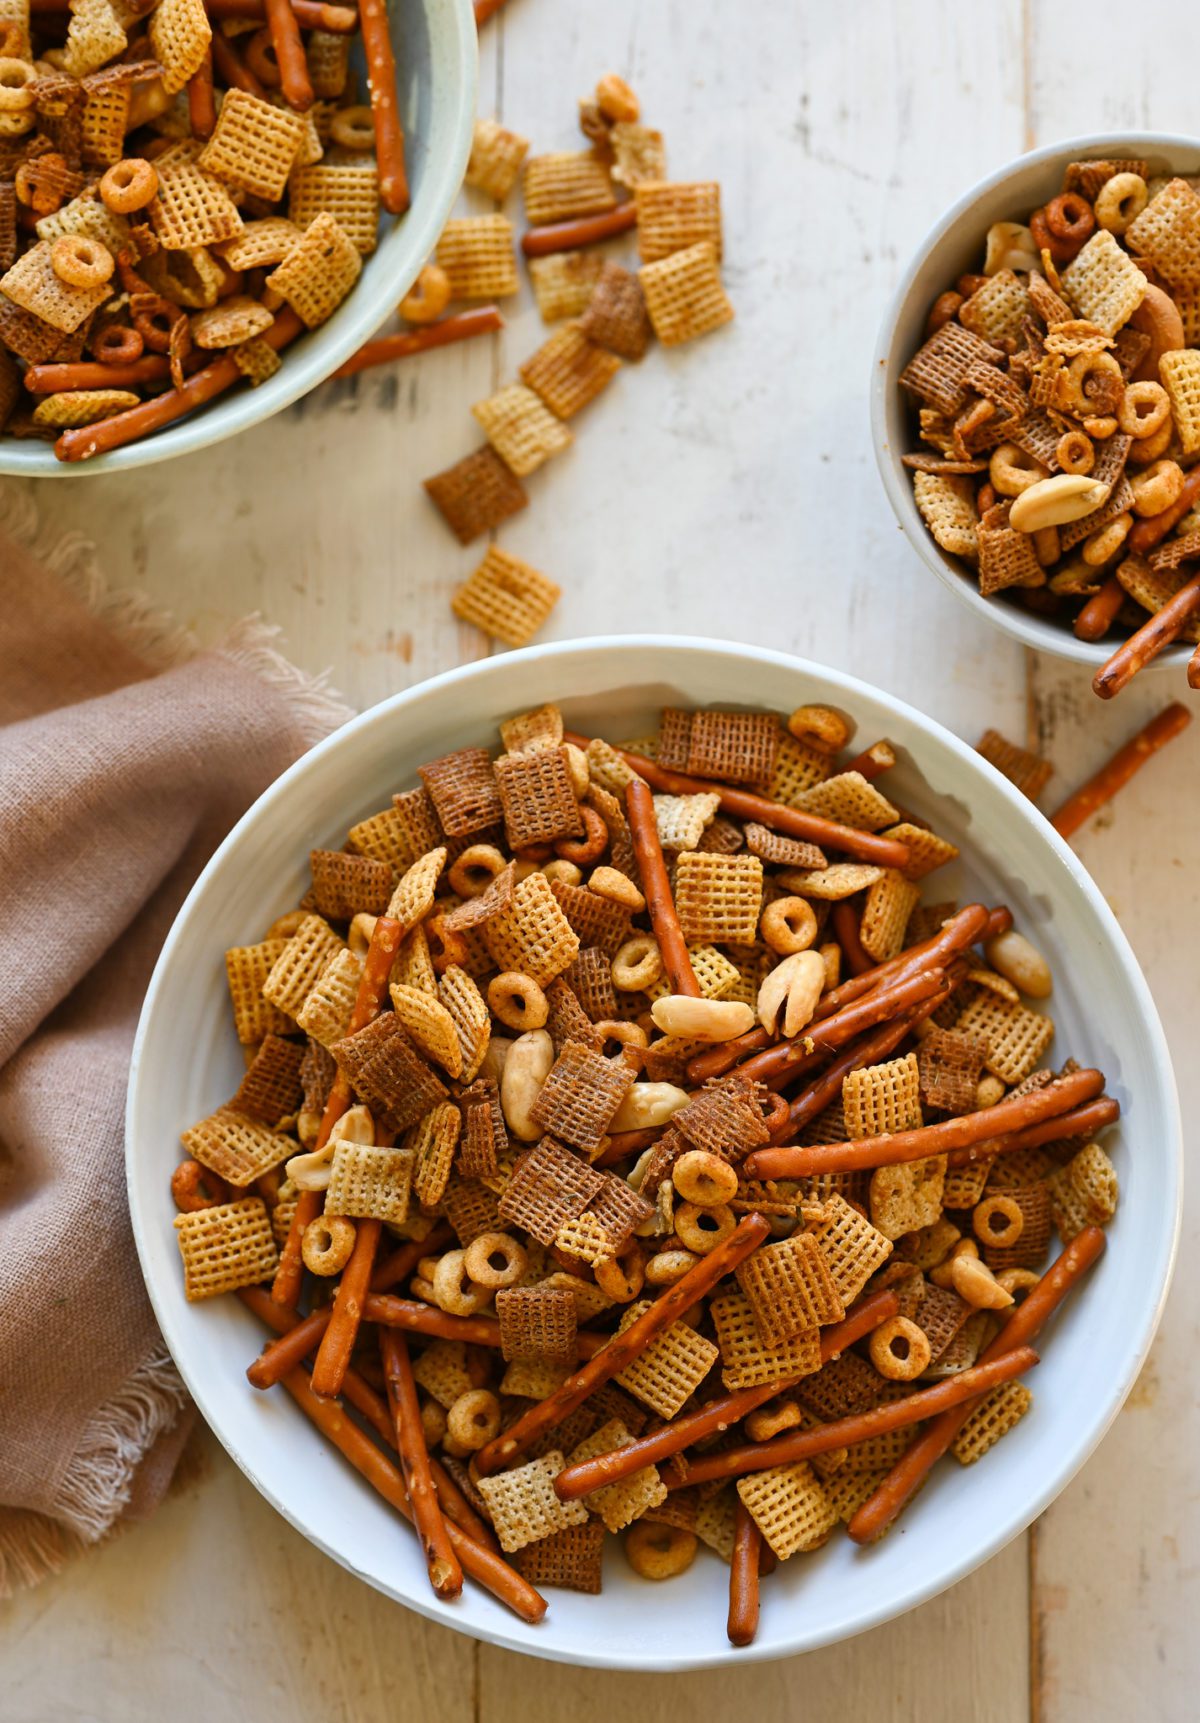 Zesty 3 Cheese Snack Mix